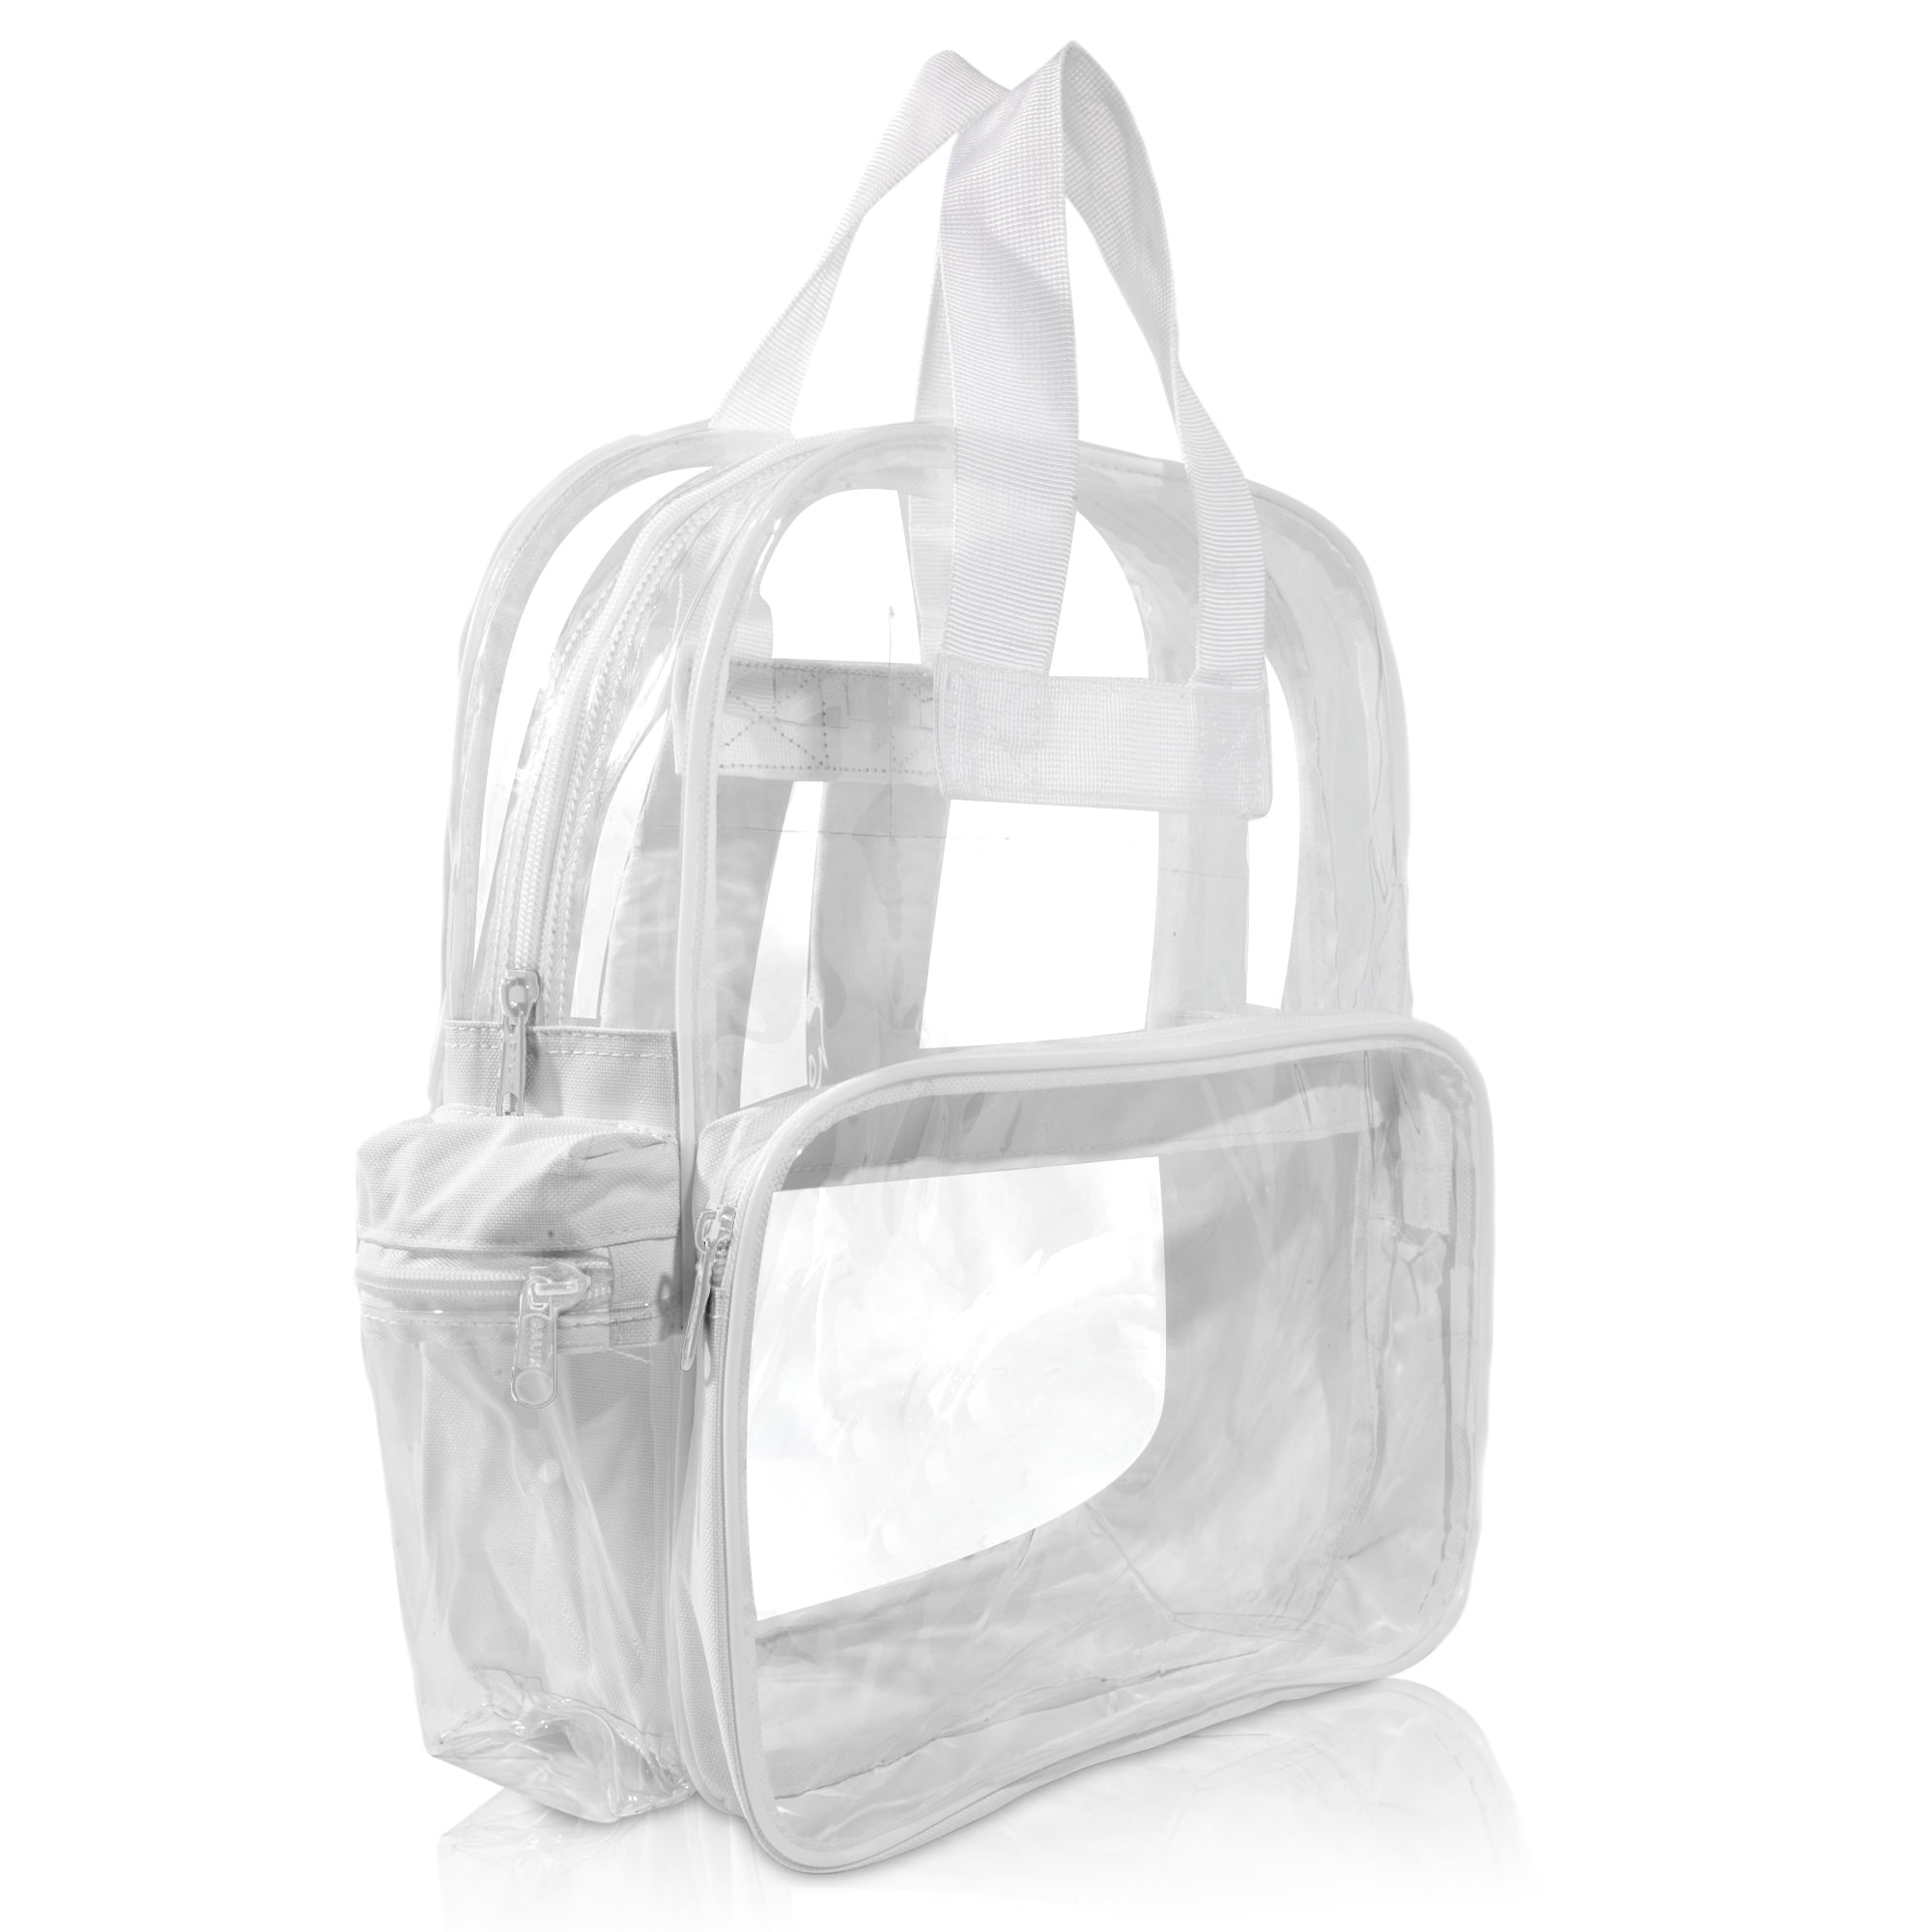 DALIX CLEAR BACKPACK TRANSPARENT PVC SCHOOL SECURITY GOLD FREE SHIPPING